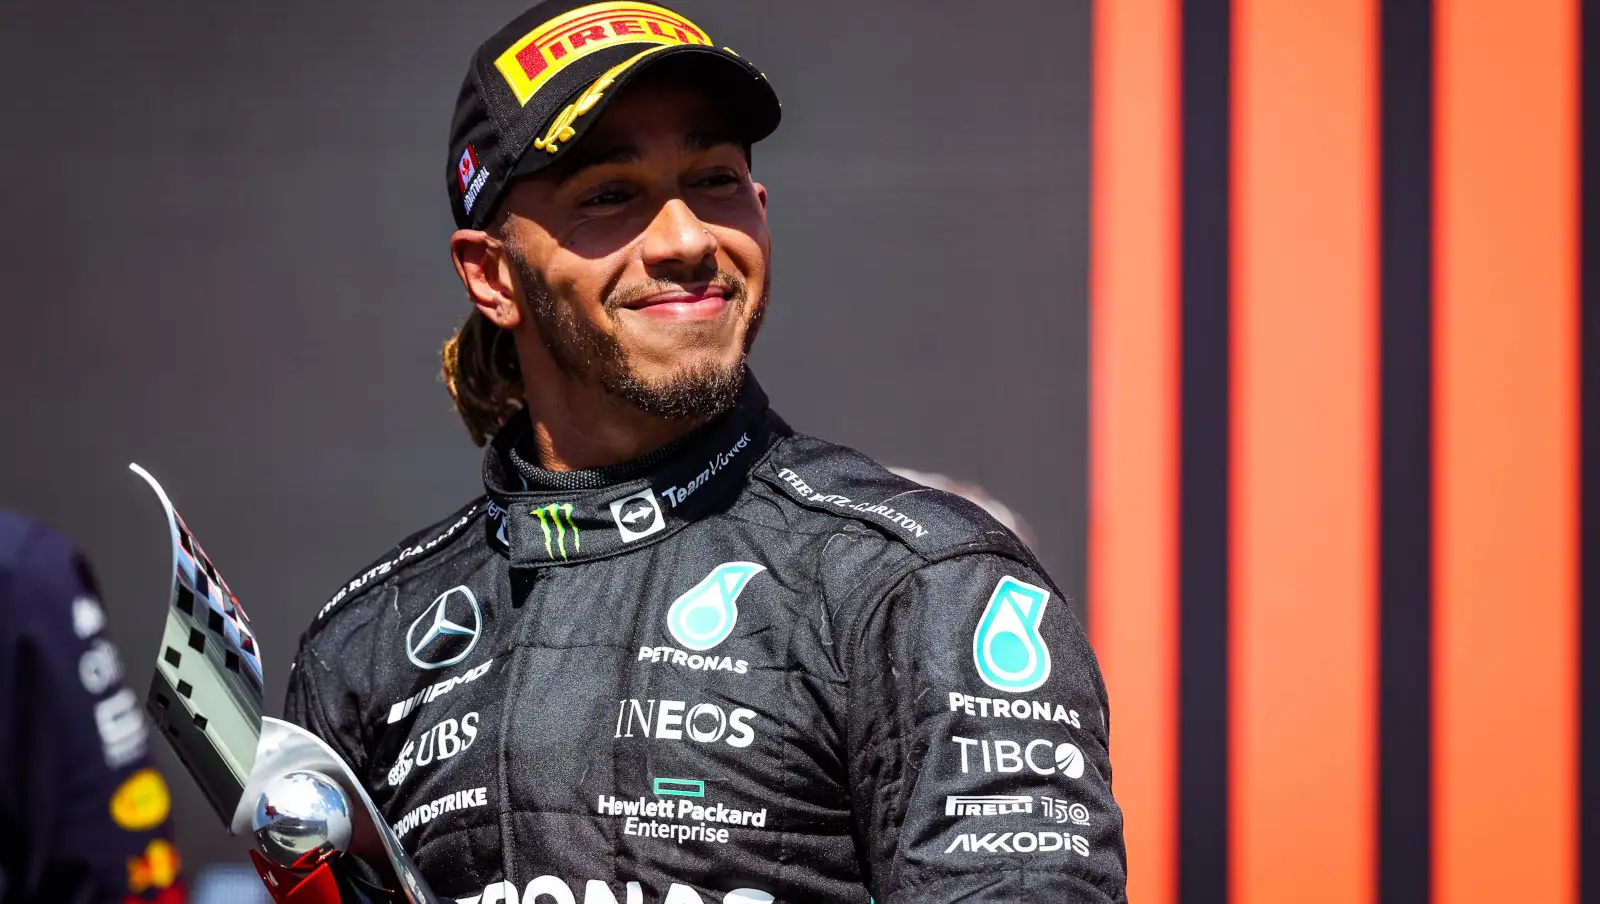 Lewis Hamilton smiling on the podium after finishing third. Montreal June 2022